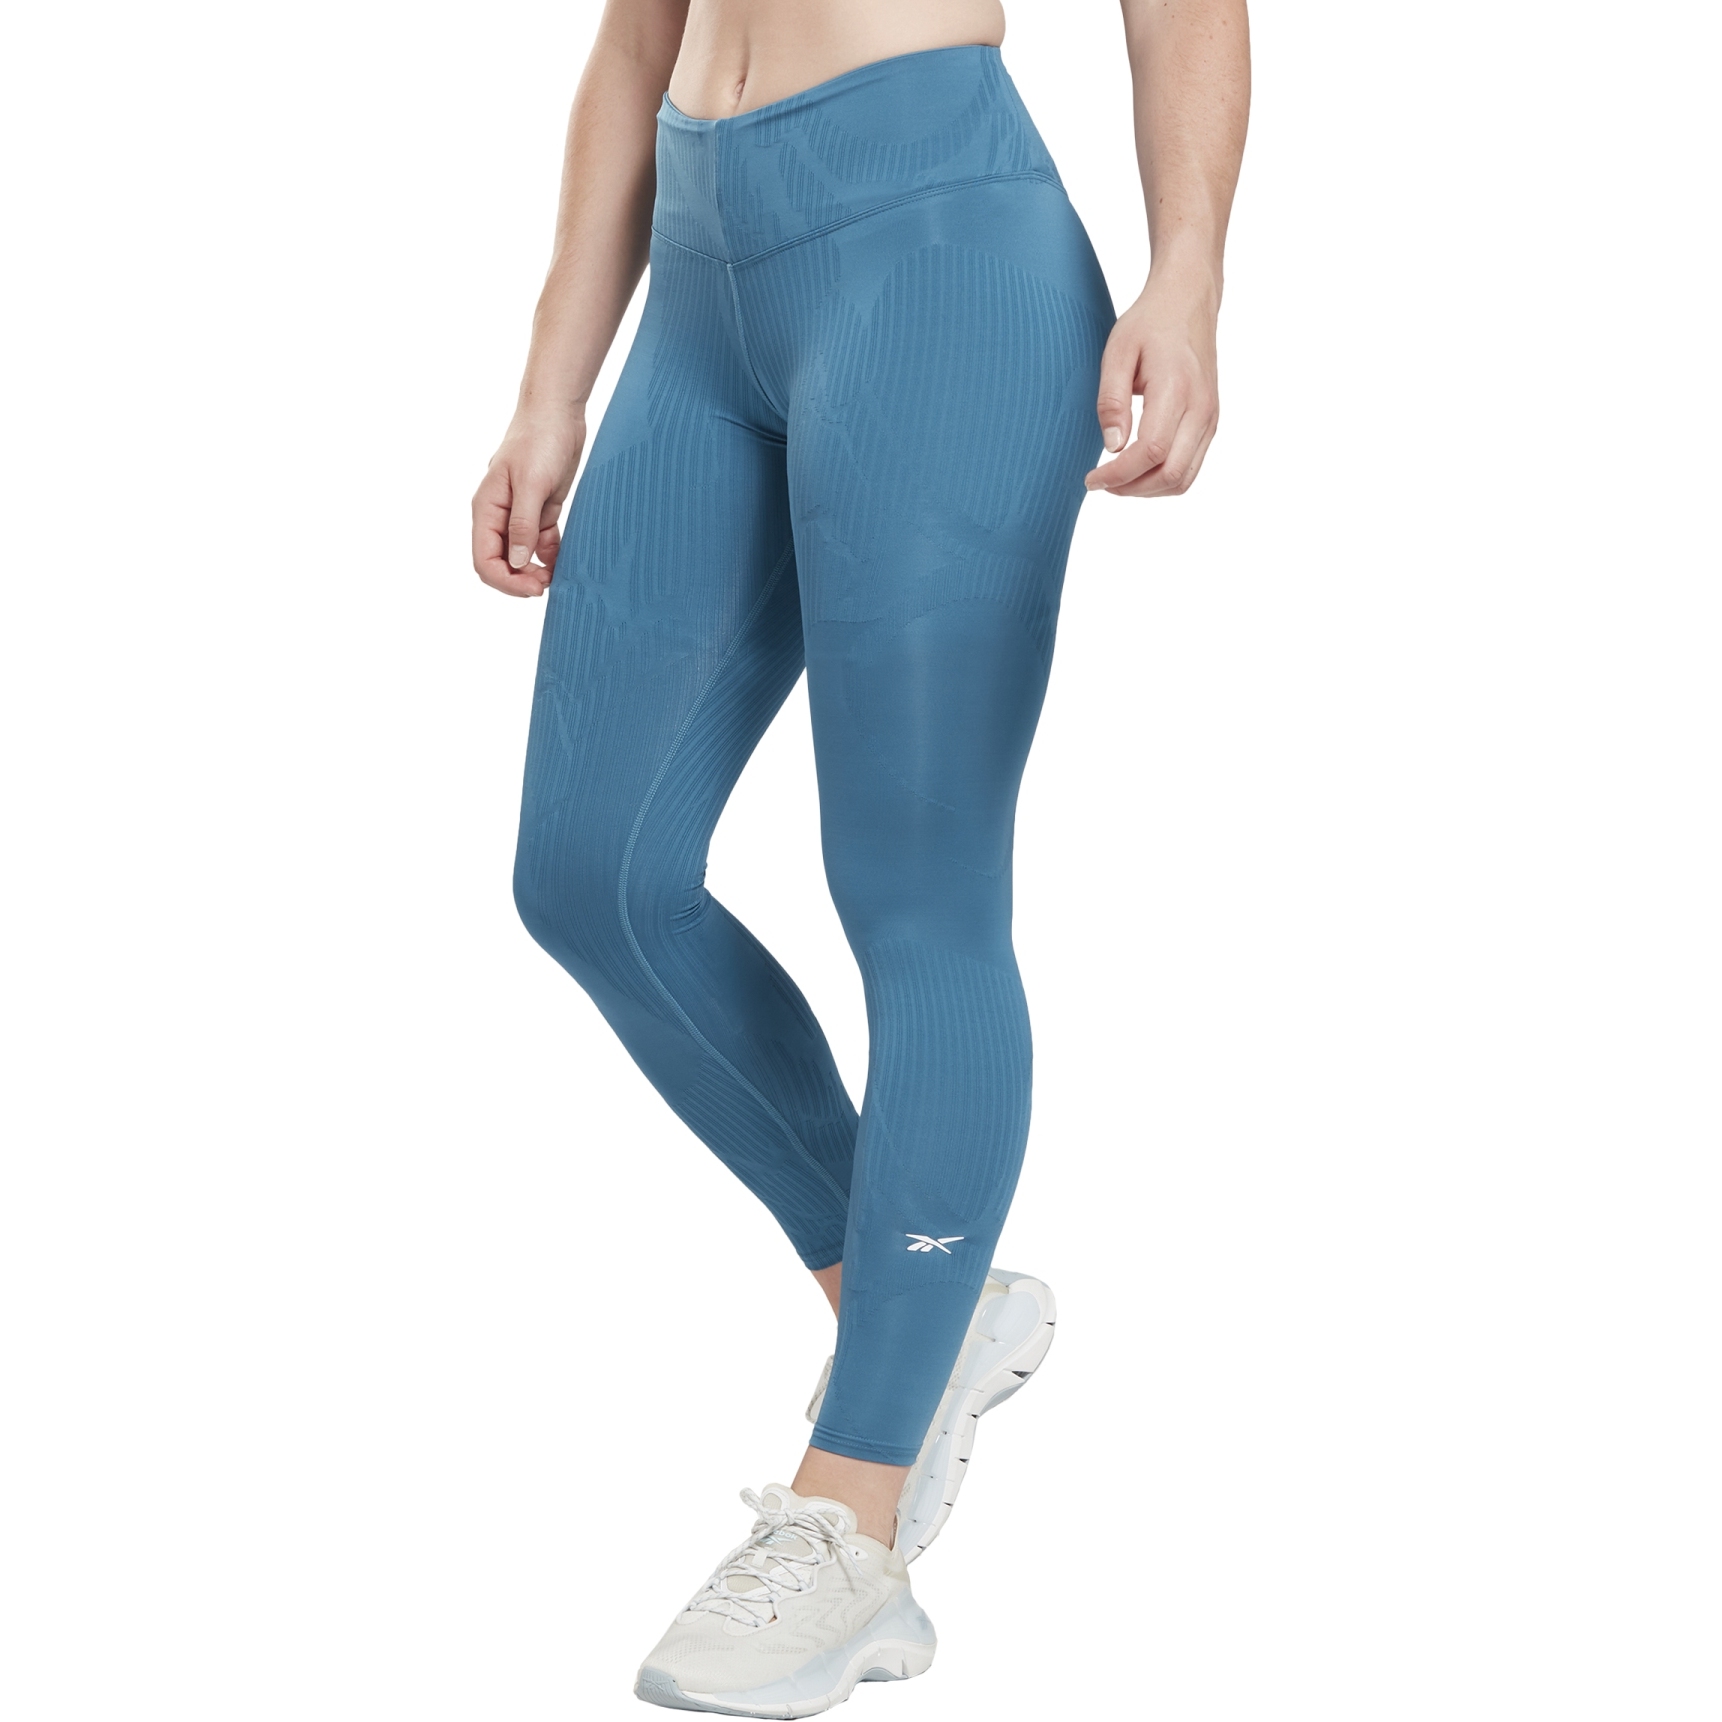 Productfoto van Reebok Knit Training High Rise Tights Dames - steely blue